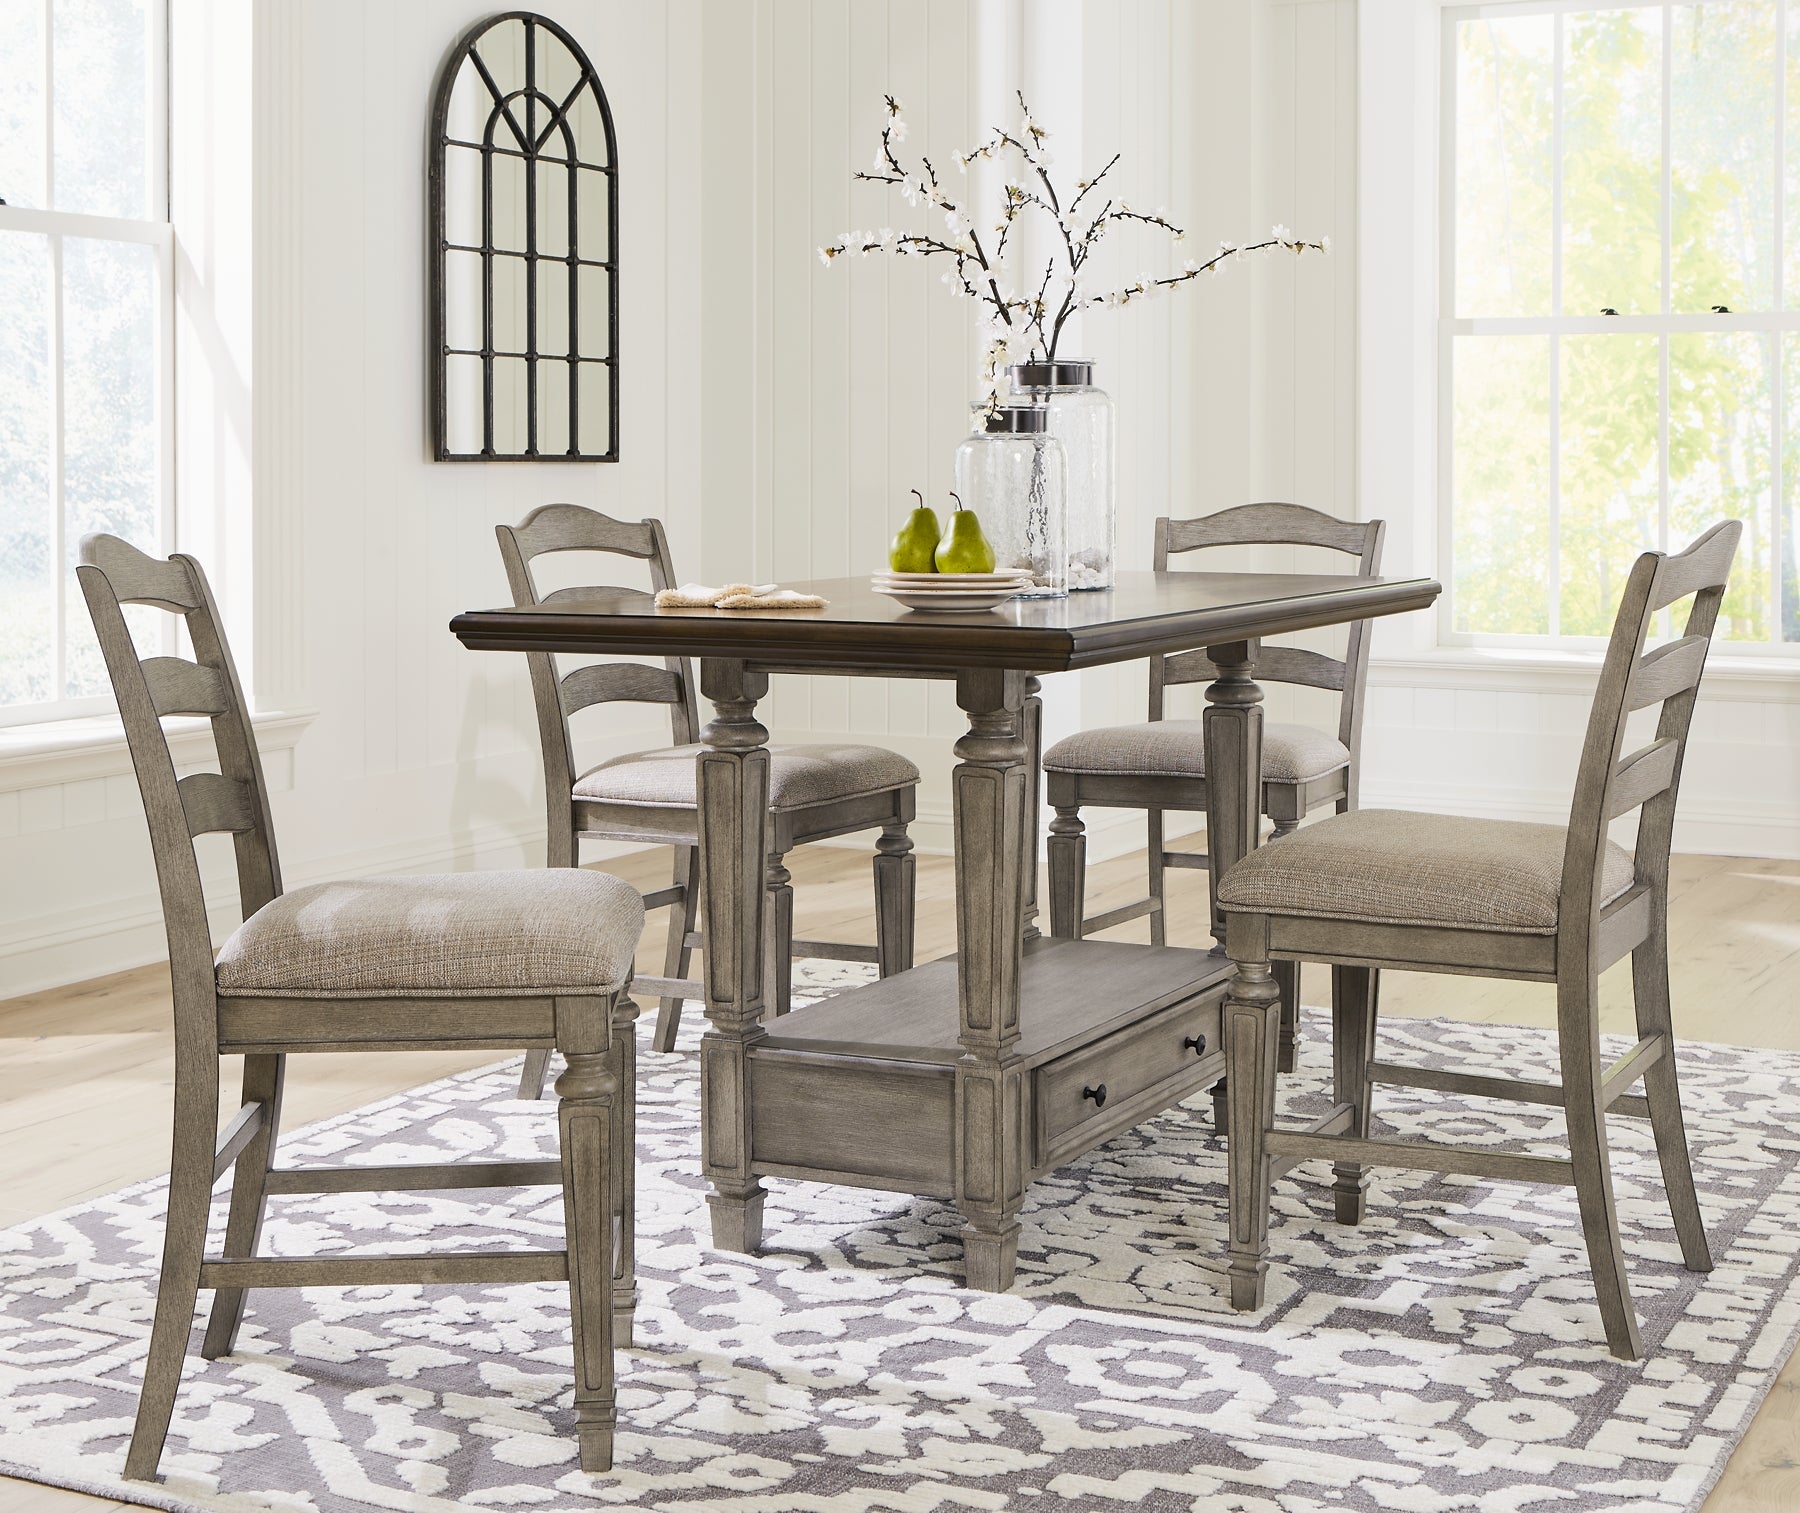 Lodenbay Counter Height Dining Table and 4 Barstools JB's Furniture  Home Furniture, Home Decor, Furniture Store